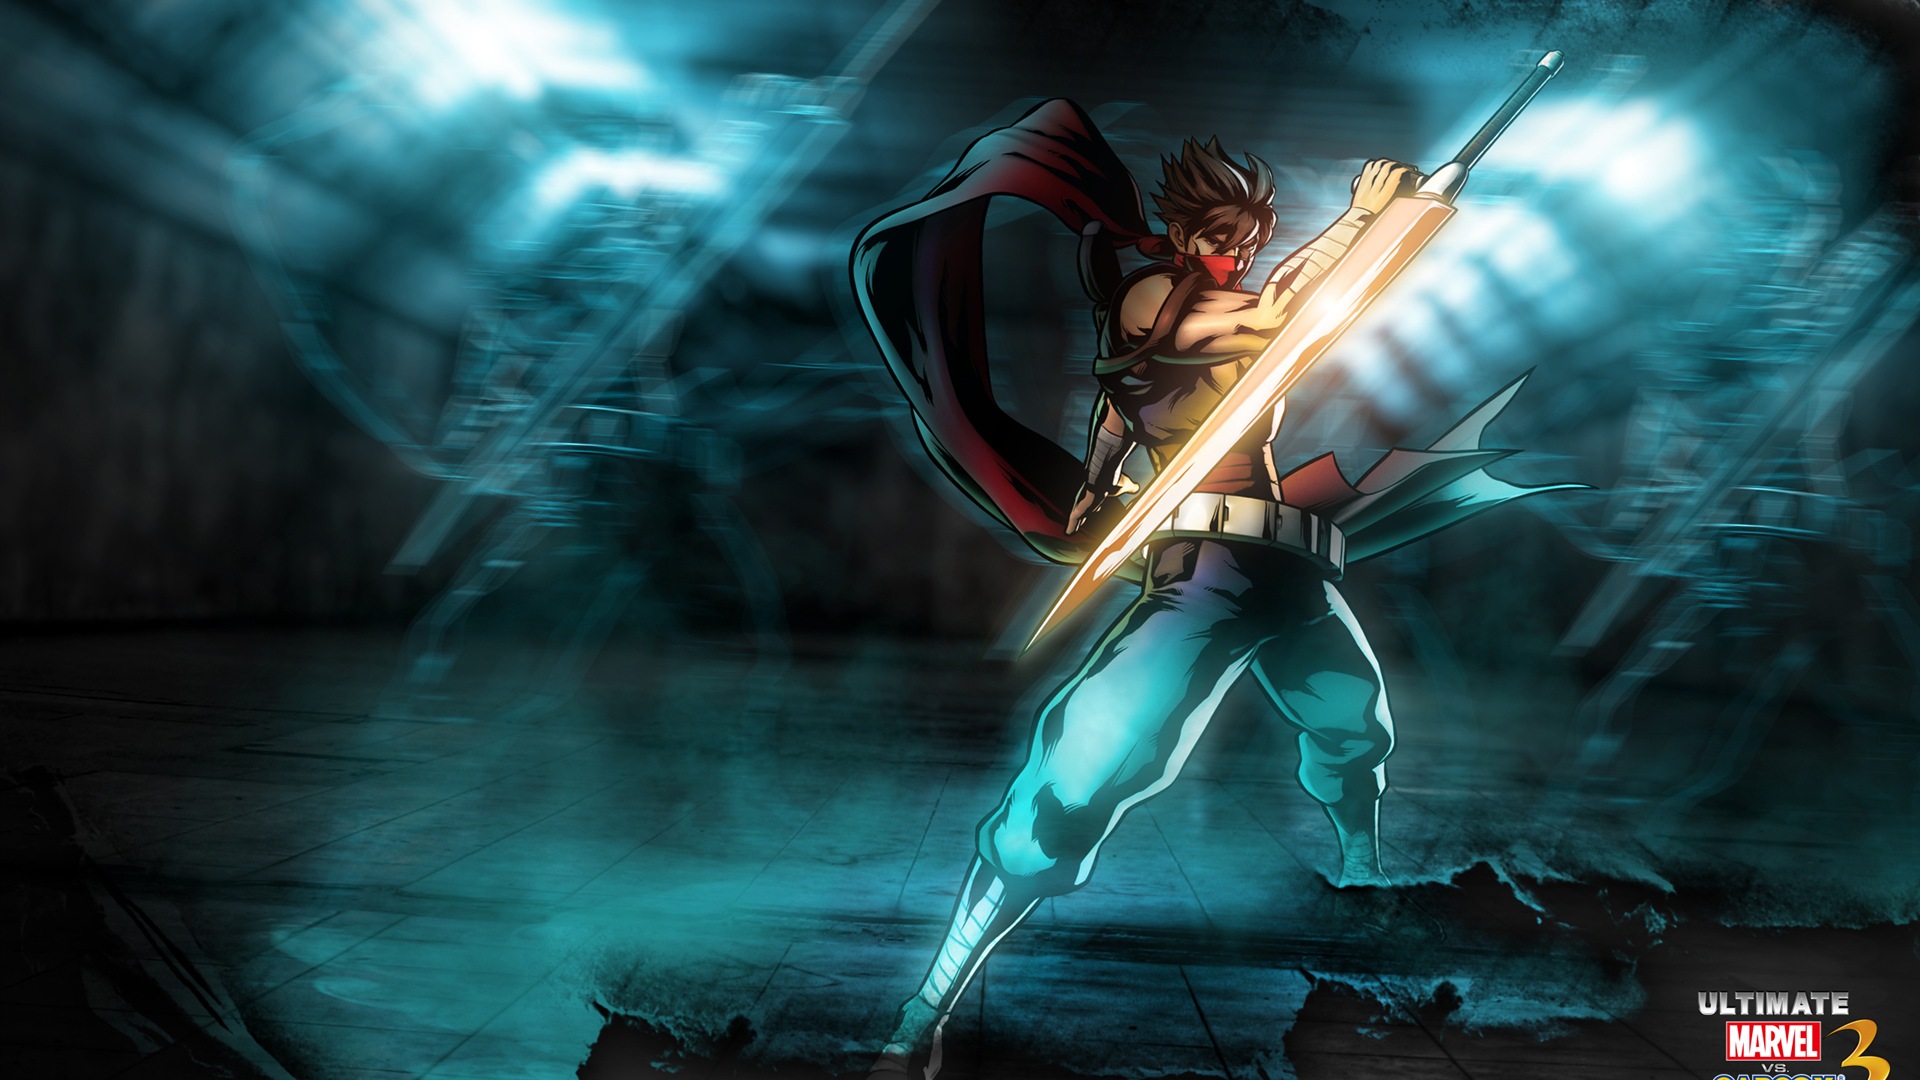 Marvel VS. Capcom 3: Fate of Two Worlds HD game wallpapers #23 - 1920x1080